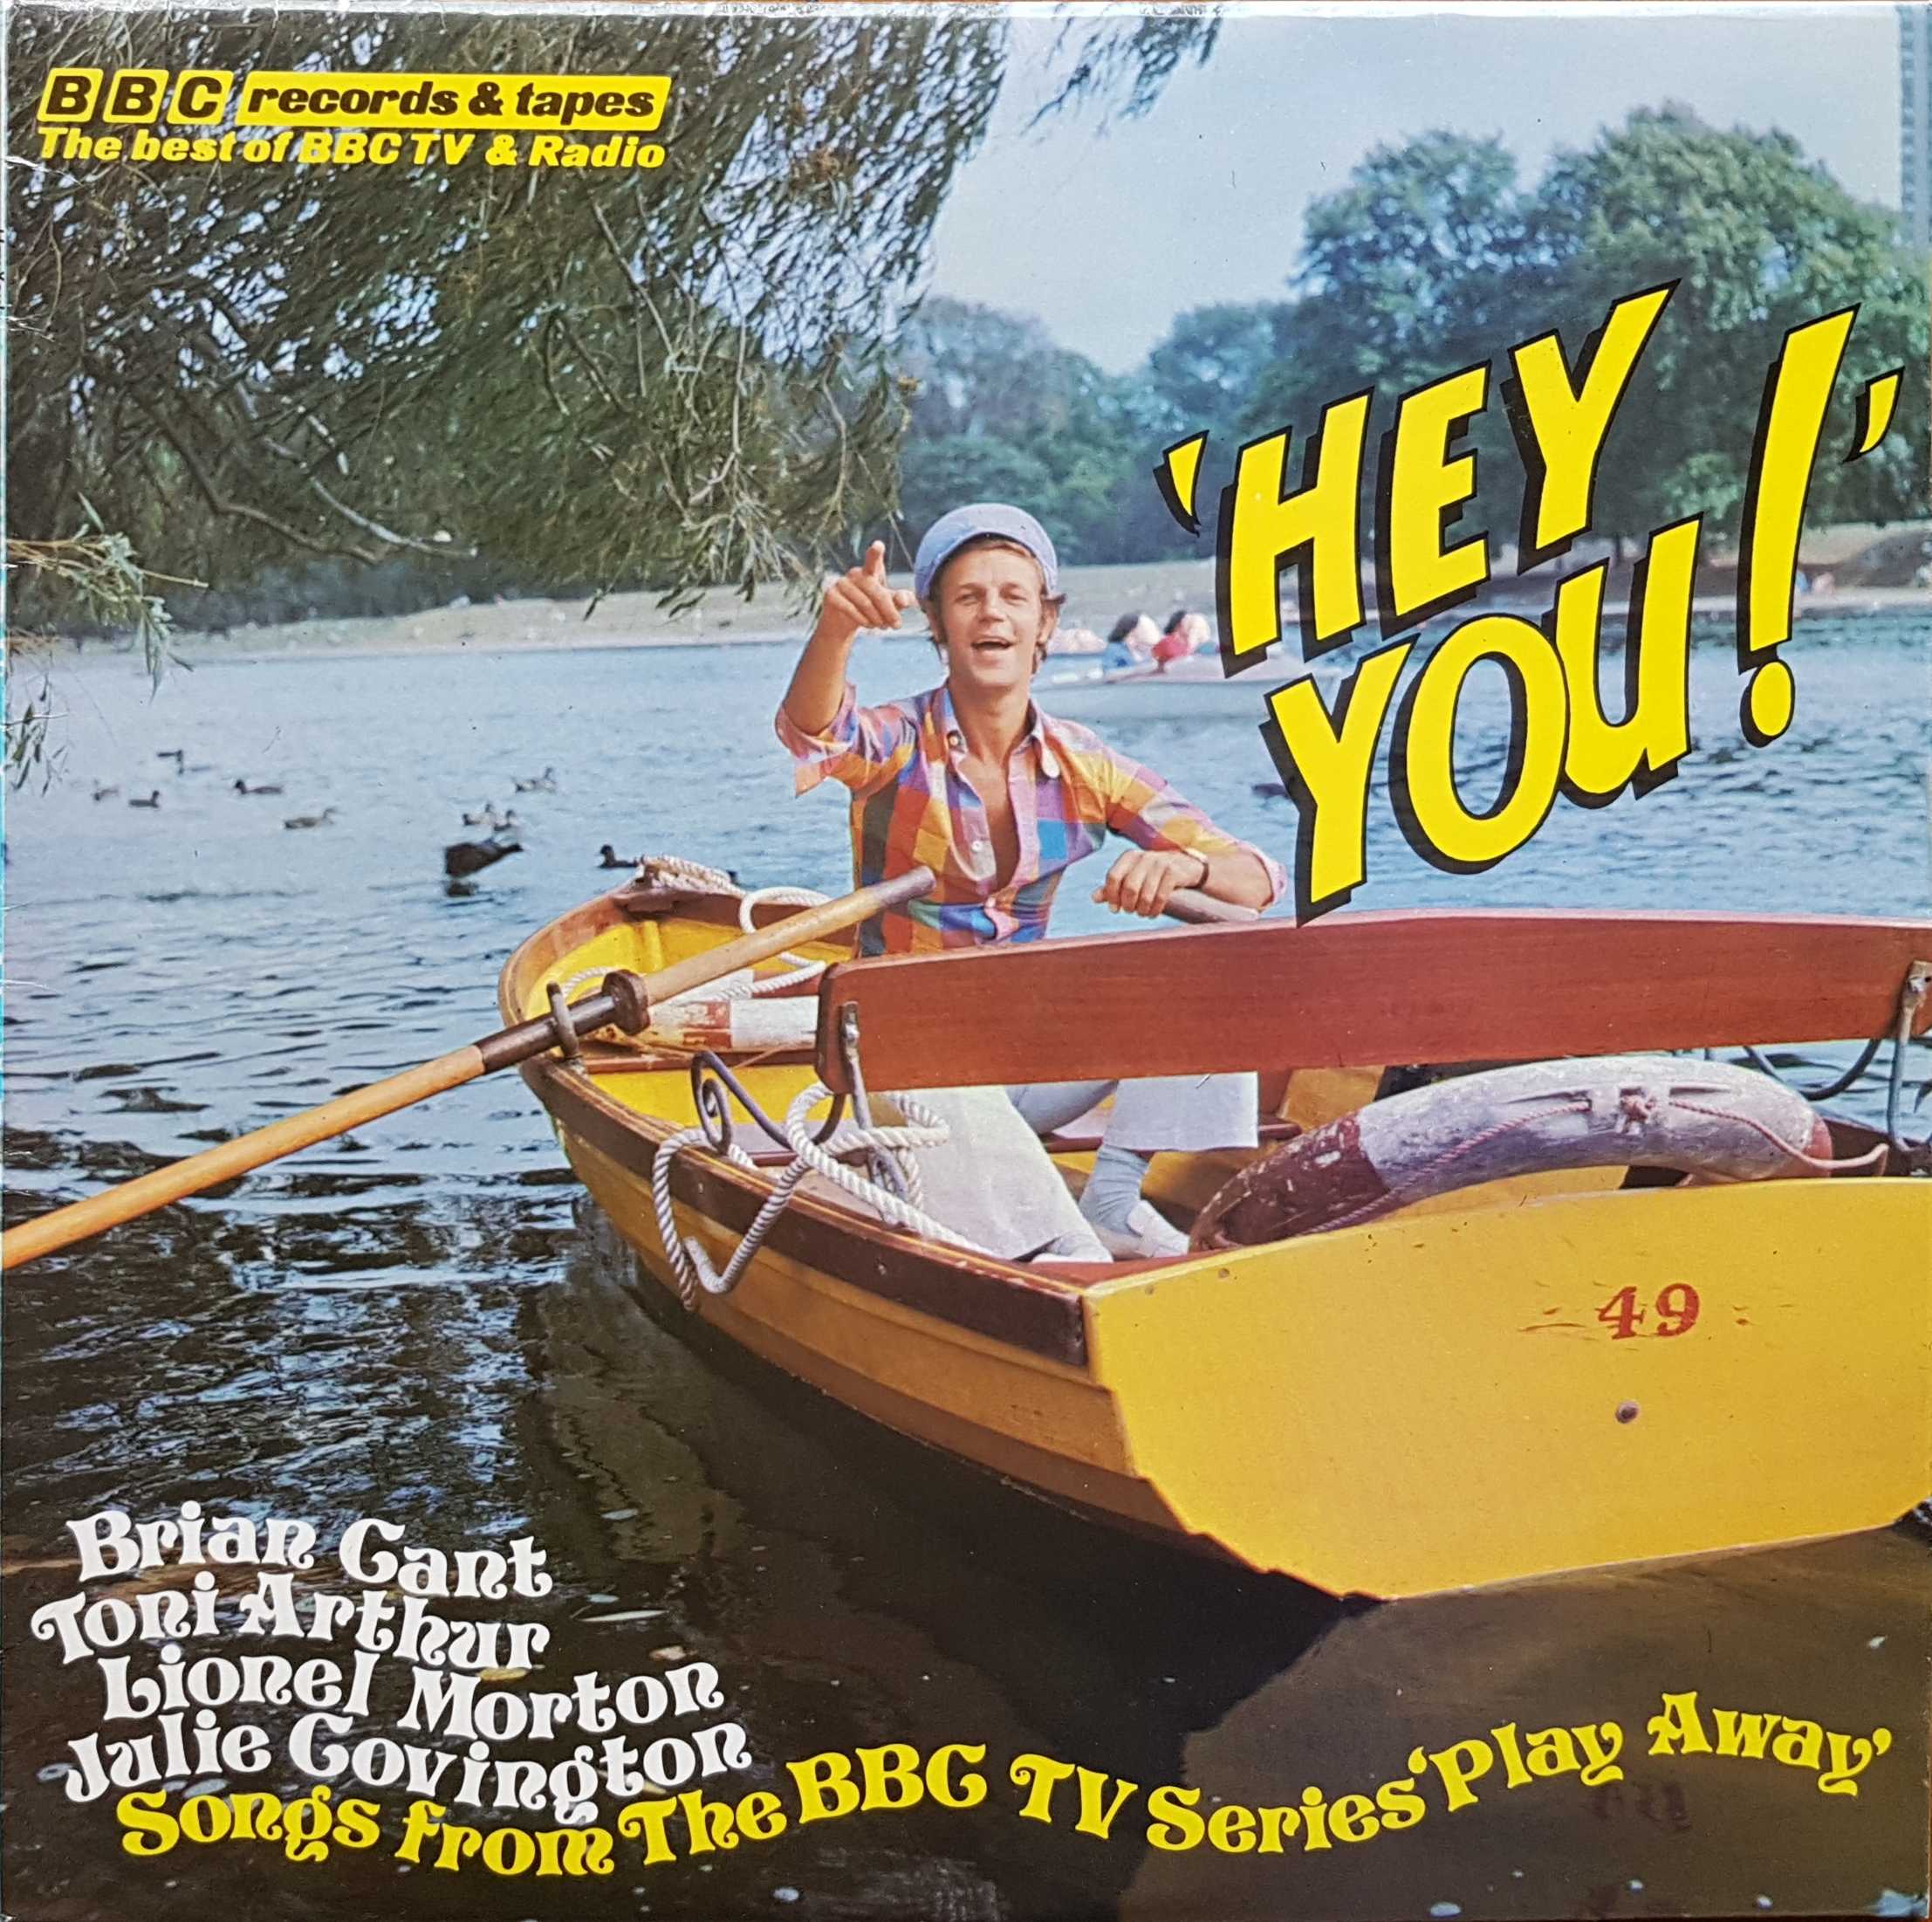 Picture of REC 209 Hey you ! by artist Brian Cant / Toni Arthur / Lionel Morton / Julie Govington from the BBC records and Tapes library